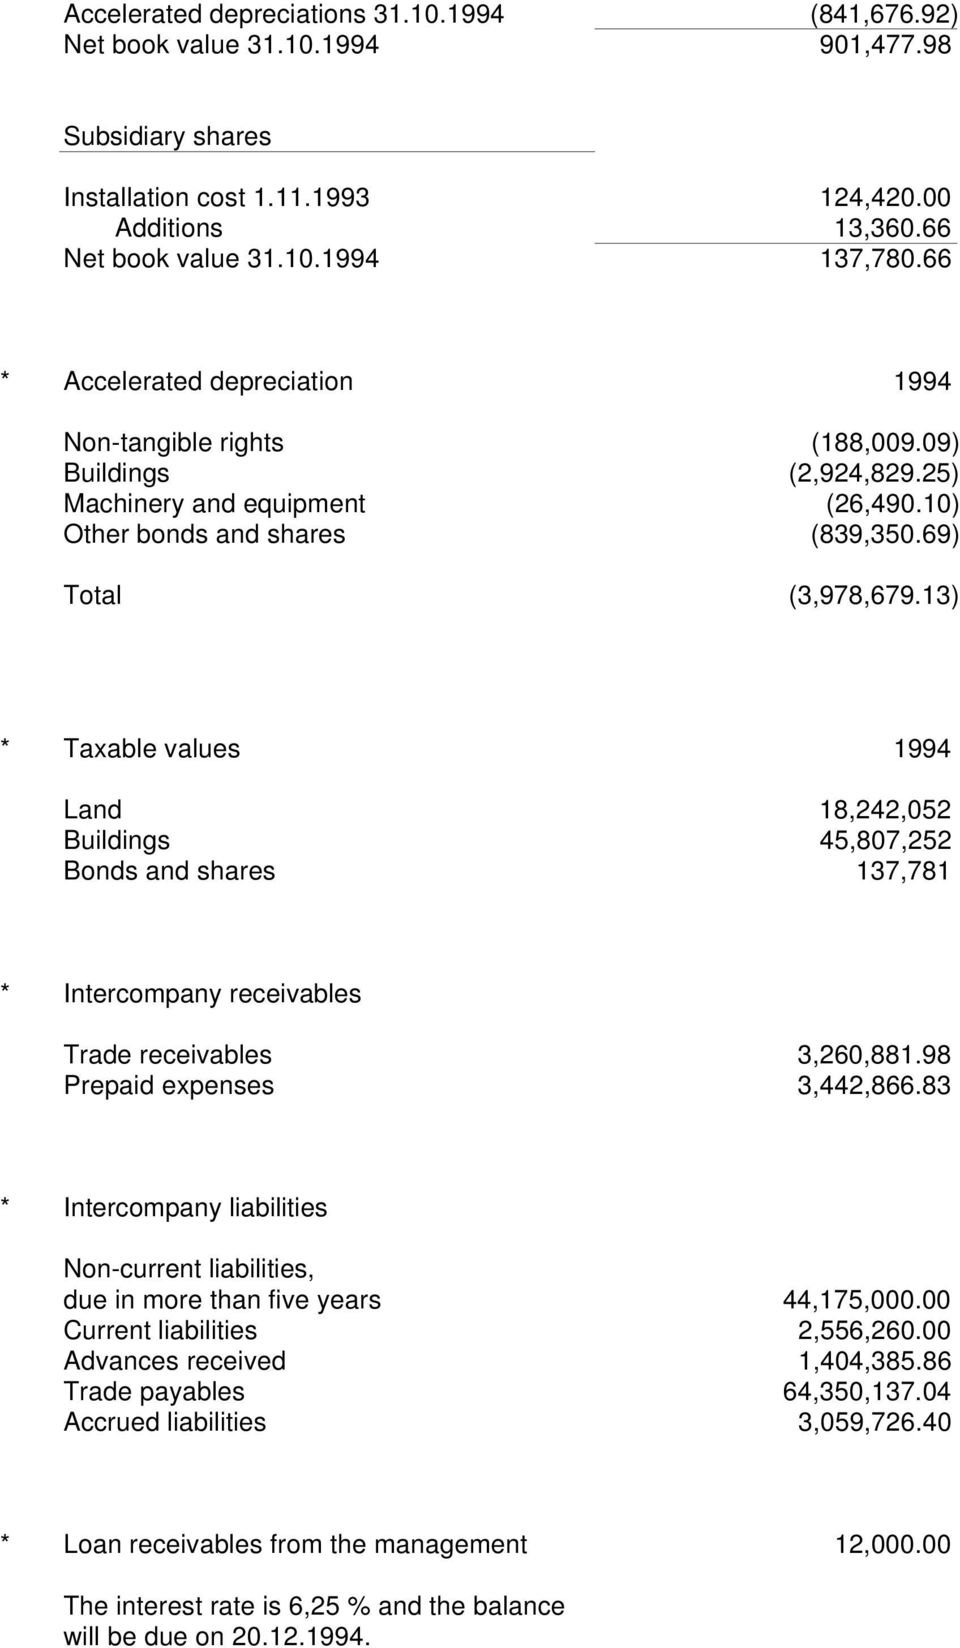 13) * Taxable values 1994 Land 18,242,052 Buildings 45,807,252 Bonds and shares 137,781 * Intercompany receivables Trade receivables 3,260,881.98 Prepaid expenses 3,442,866.